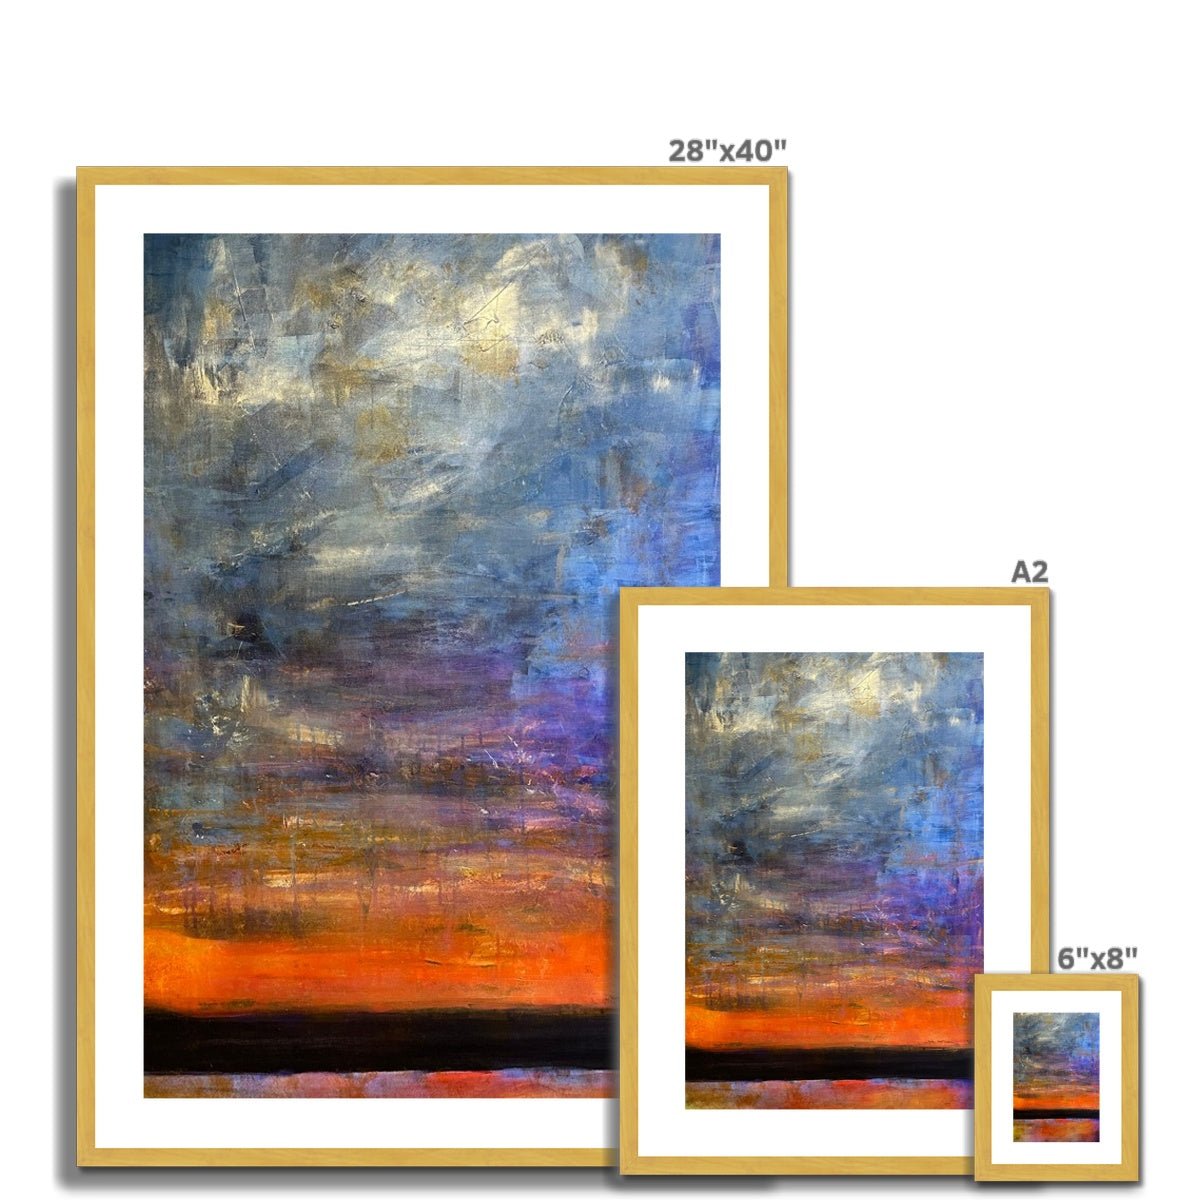 Horizon Dreams Abstract Painting | Antique Framed & Mounted Prints From Scotland-Antique Framed & Mounted Prints-Abstract & Impressionistic Art Gallery-Paintings, Prints, Homeware, Art Gifts From Scotland By Scottish Artist Kevin Hunter